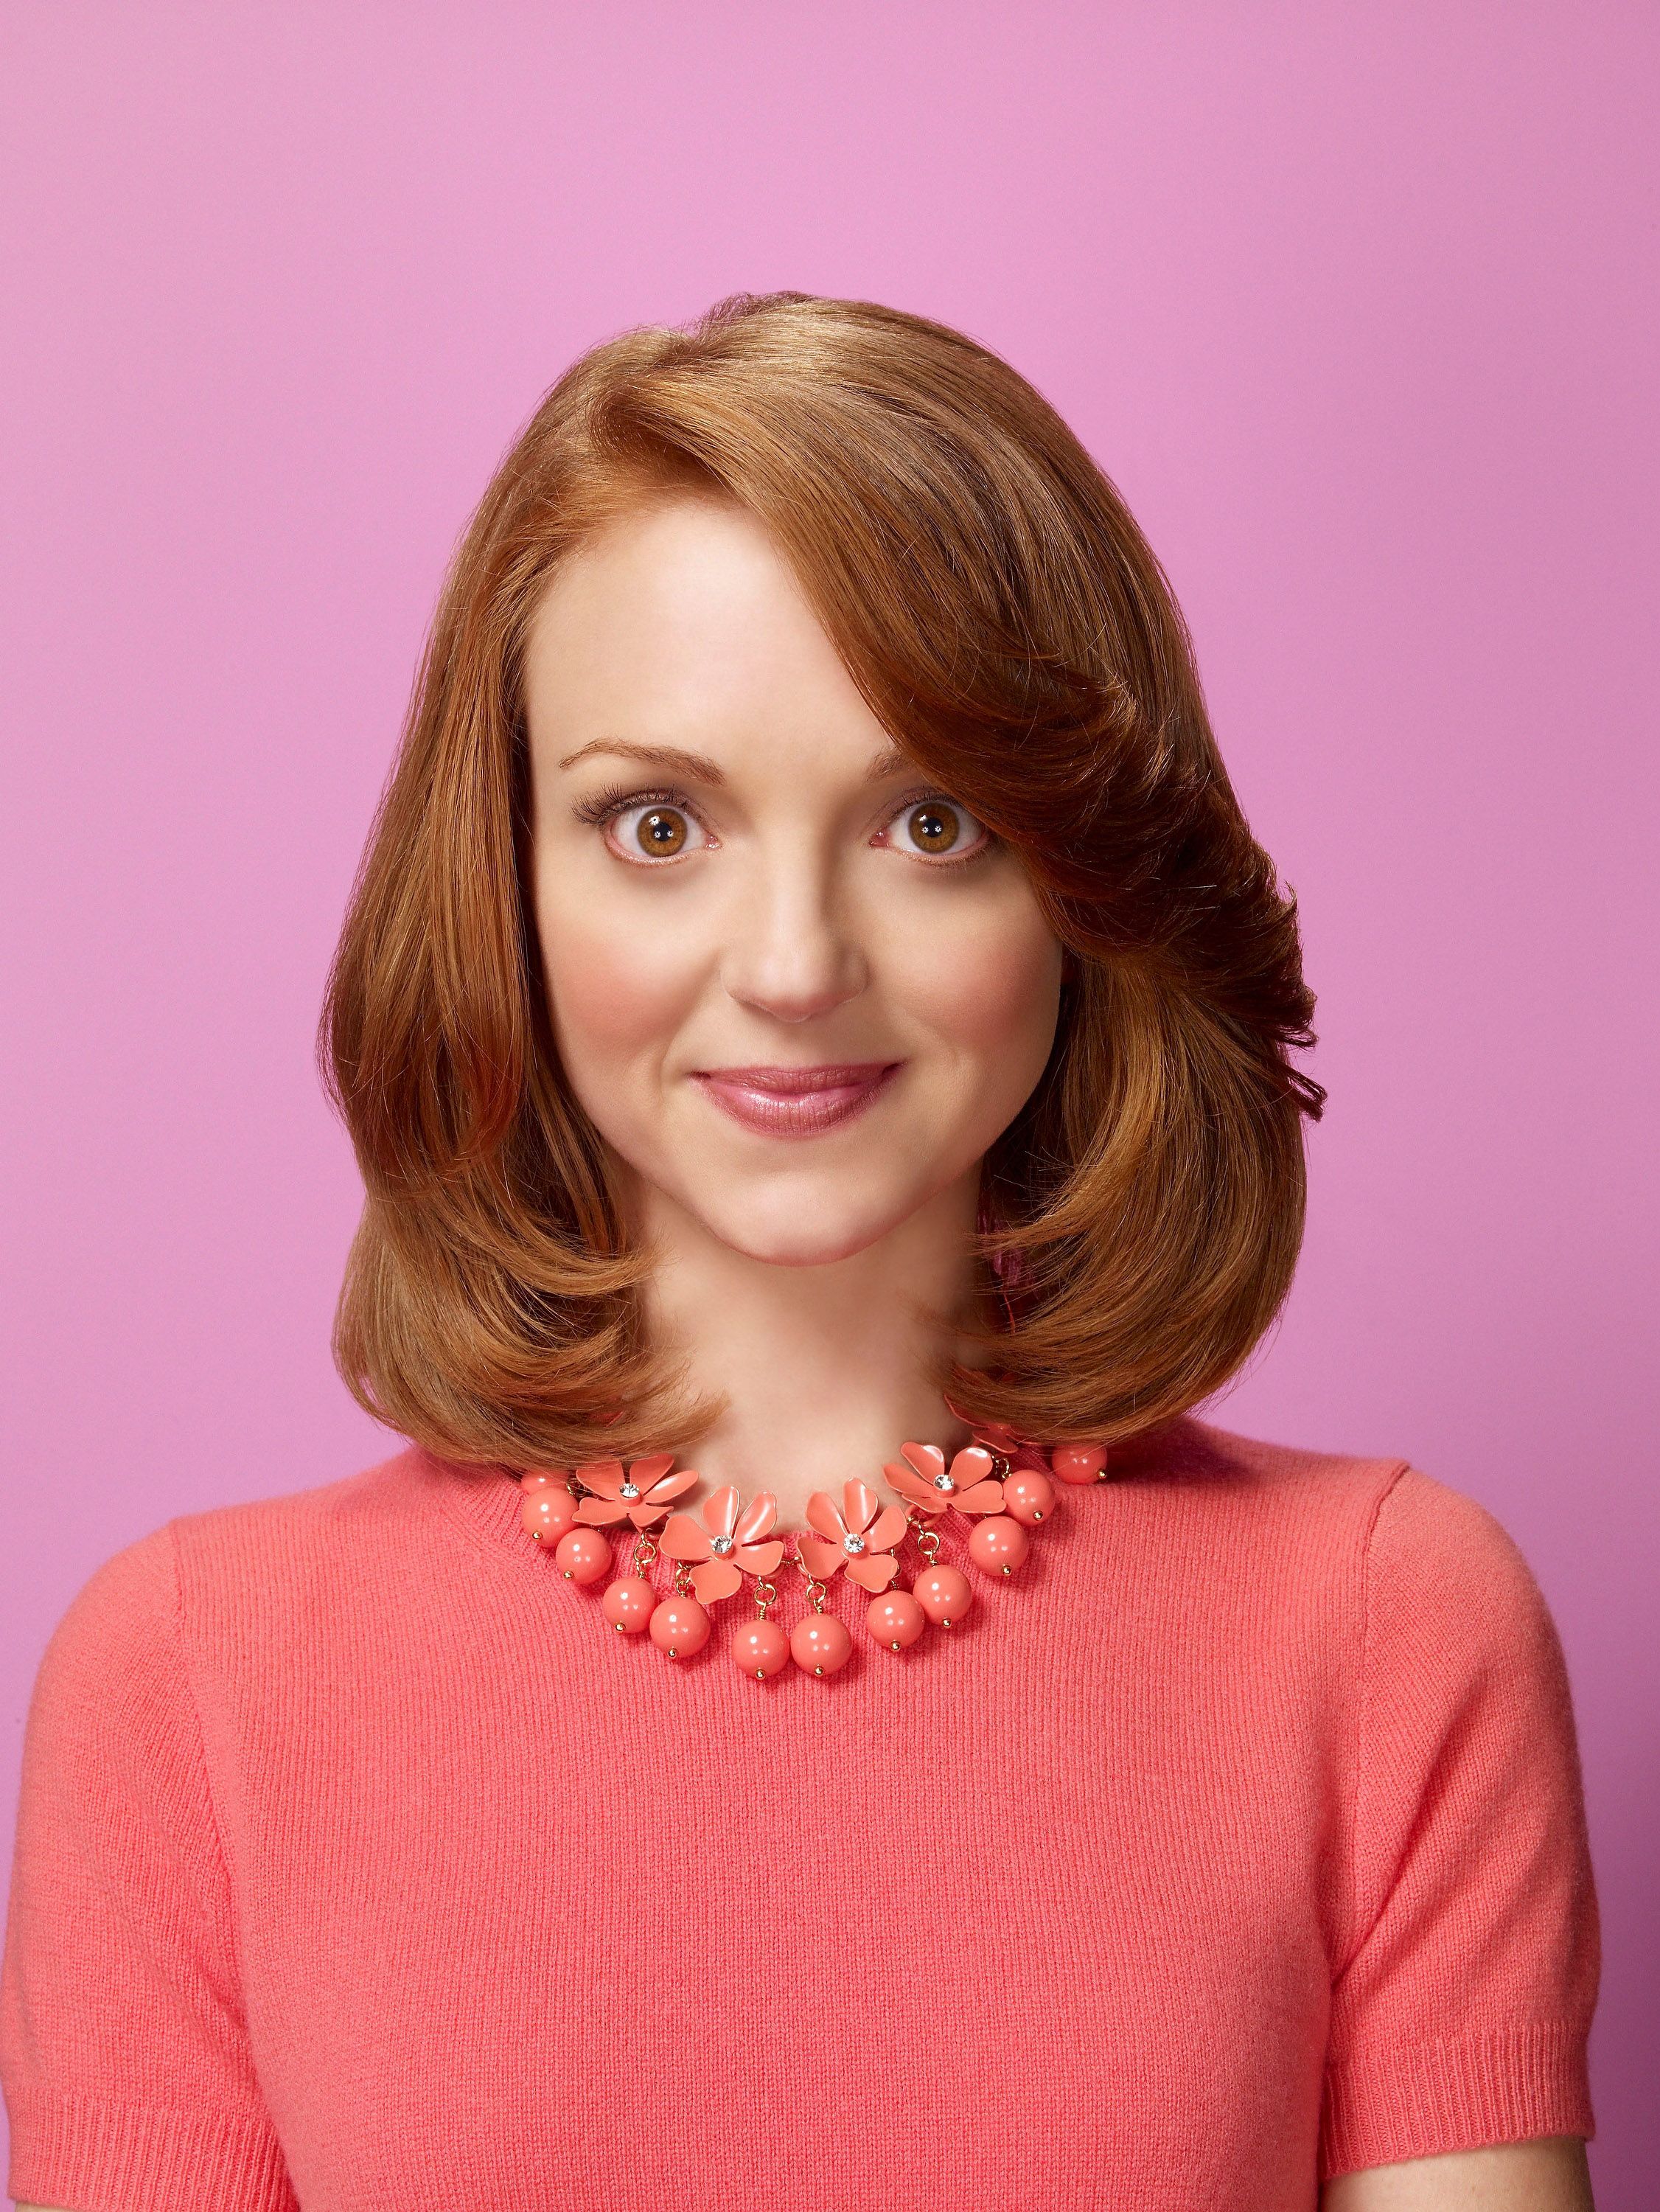 Jayma Mays Fuck Video - What All The 'Glee' Stars Are Up To Now - 'Glee' Cast, Then & Now